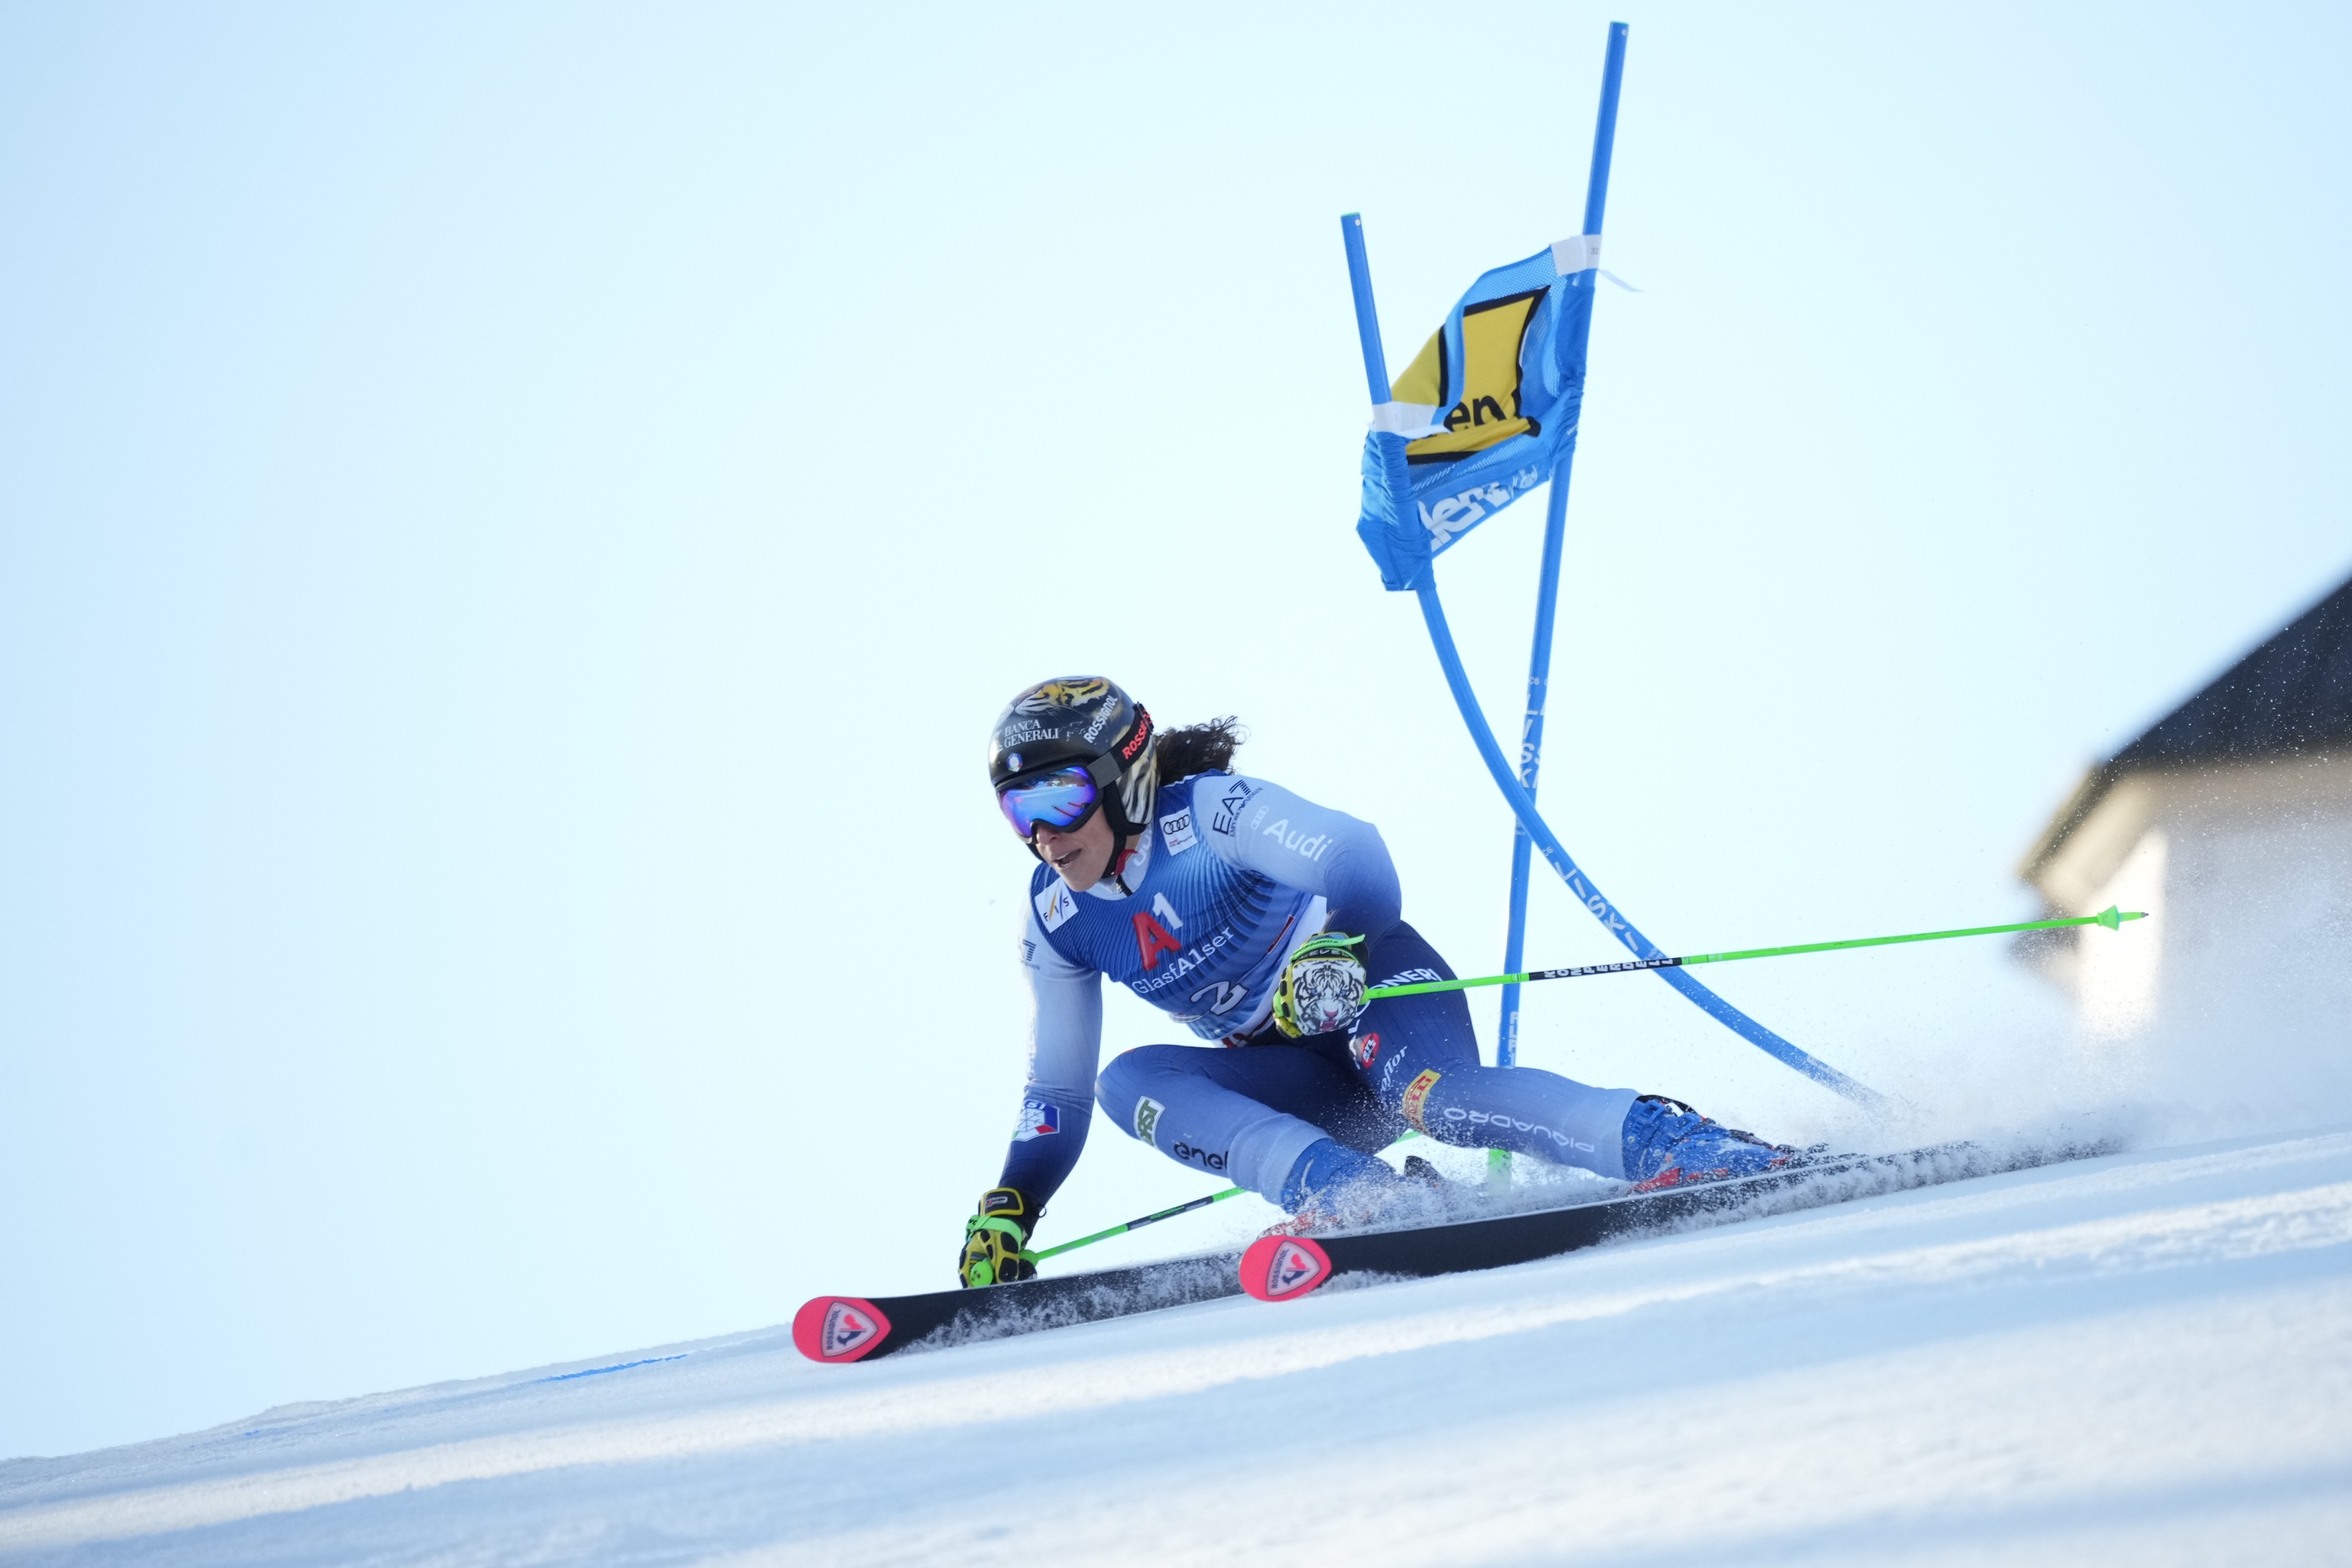 LIENZ, AUSTRIA - DECEMBER 28: Federica Brignone of Team Italy in action during the Audi FIS Alpine Ski World Cup Women's Giant Slalom on December 28, 2023 in Lienz, Austria. (Photo by Millo Moravski/Agence Zoom/Getty Images)